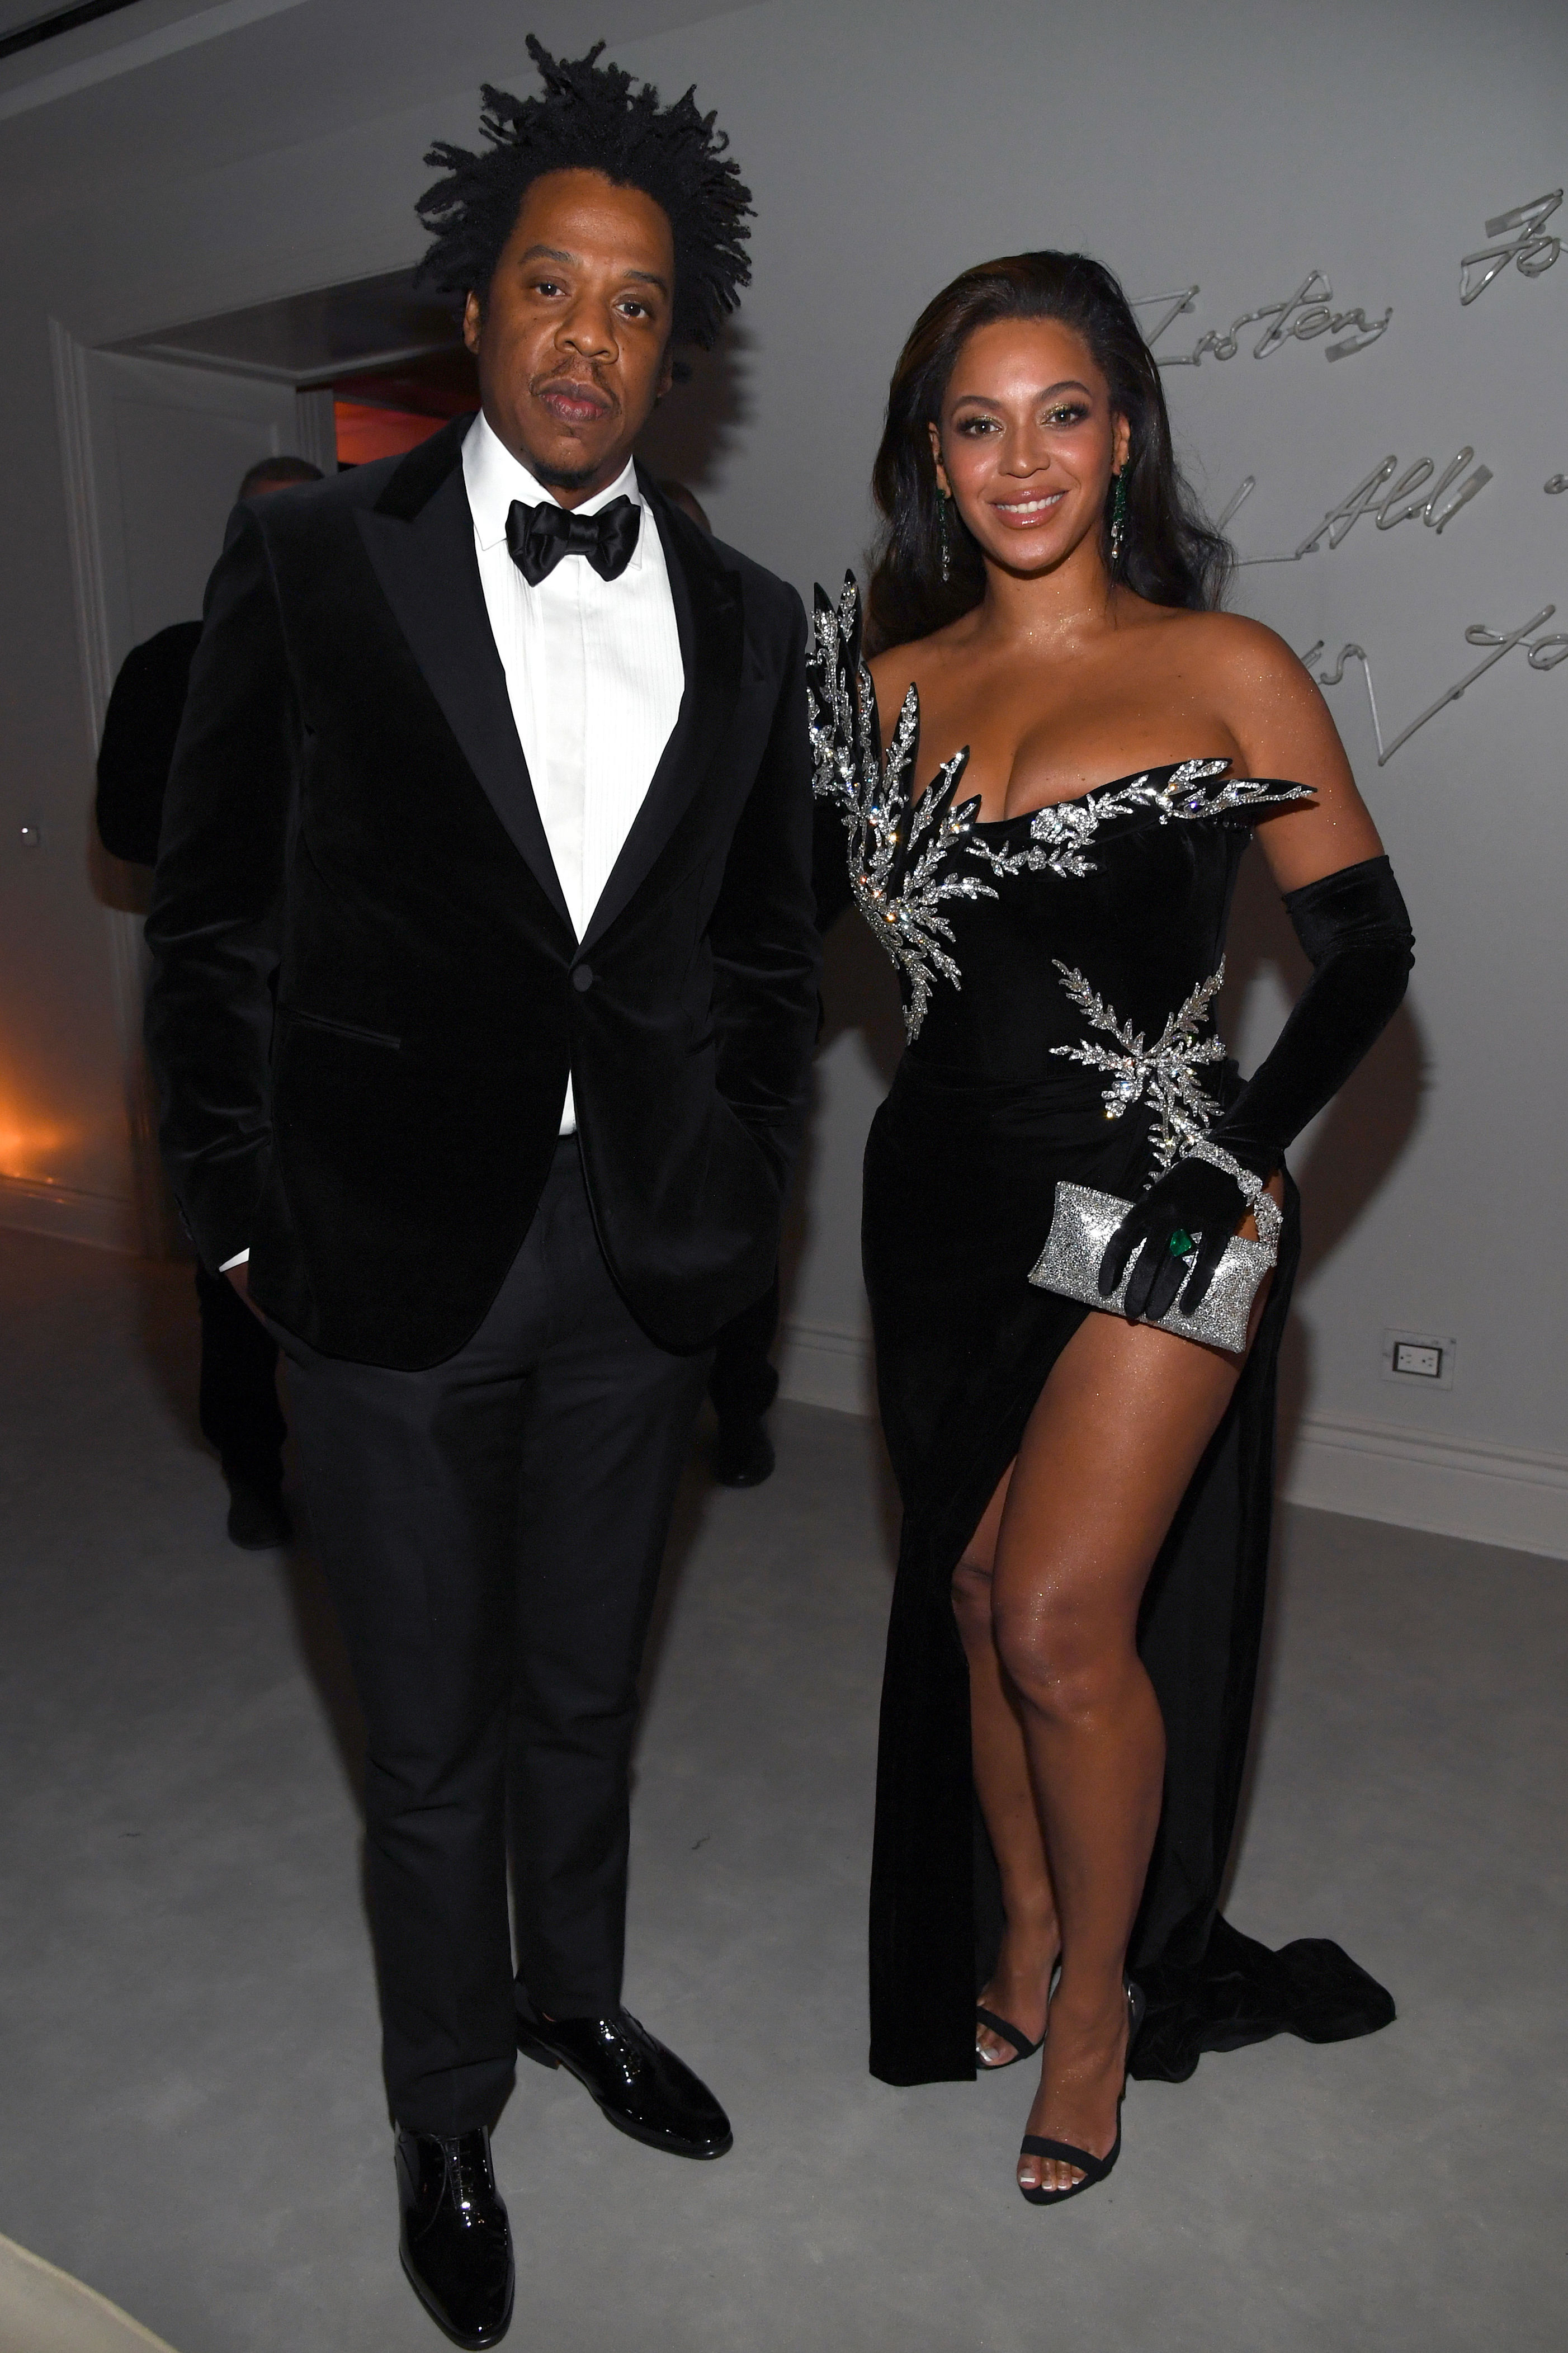 <p>This power couple has overcome far more than an age gap! <a href="https://www.wonderwall.com/celebrity/profiles/overview/beyonce-243.article">Beyonce</a> is 12 years younger than husband <a href="https://www.wonderwall.com/celebrity/profiles/overview/jay-z-467.article">JAY-Z</a>, whom she started dating when she was 19. In 2003, Bey released her smash hit single "Crazy in Love" featuring Jay, which was reportedly inspired by the beginning stages of their romance. The "Everything Is Love" musical duo tied the knot in 2008 and now share three children -- daughter Blue Ivy Carter and twins Sir and Rumi.</p>